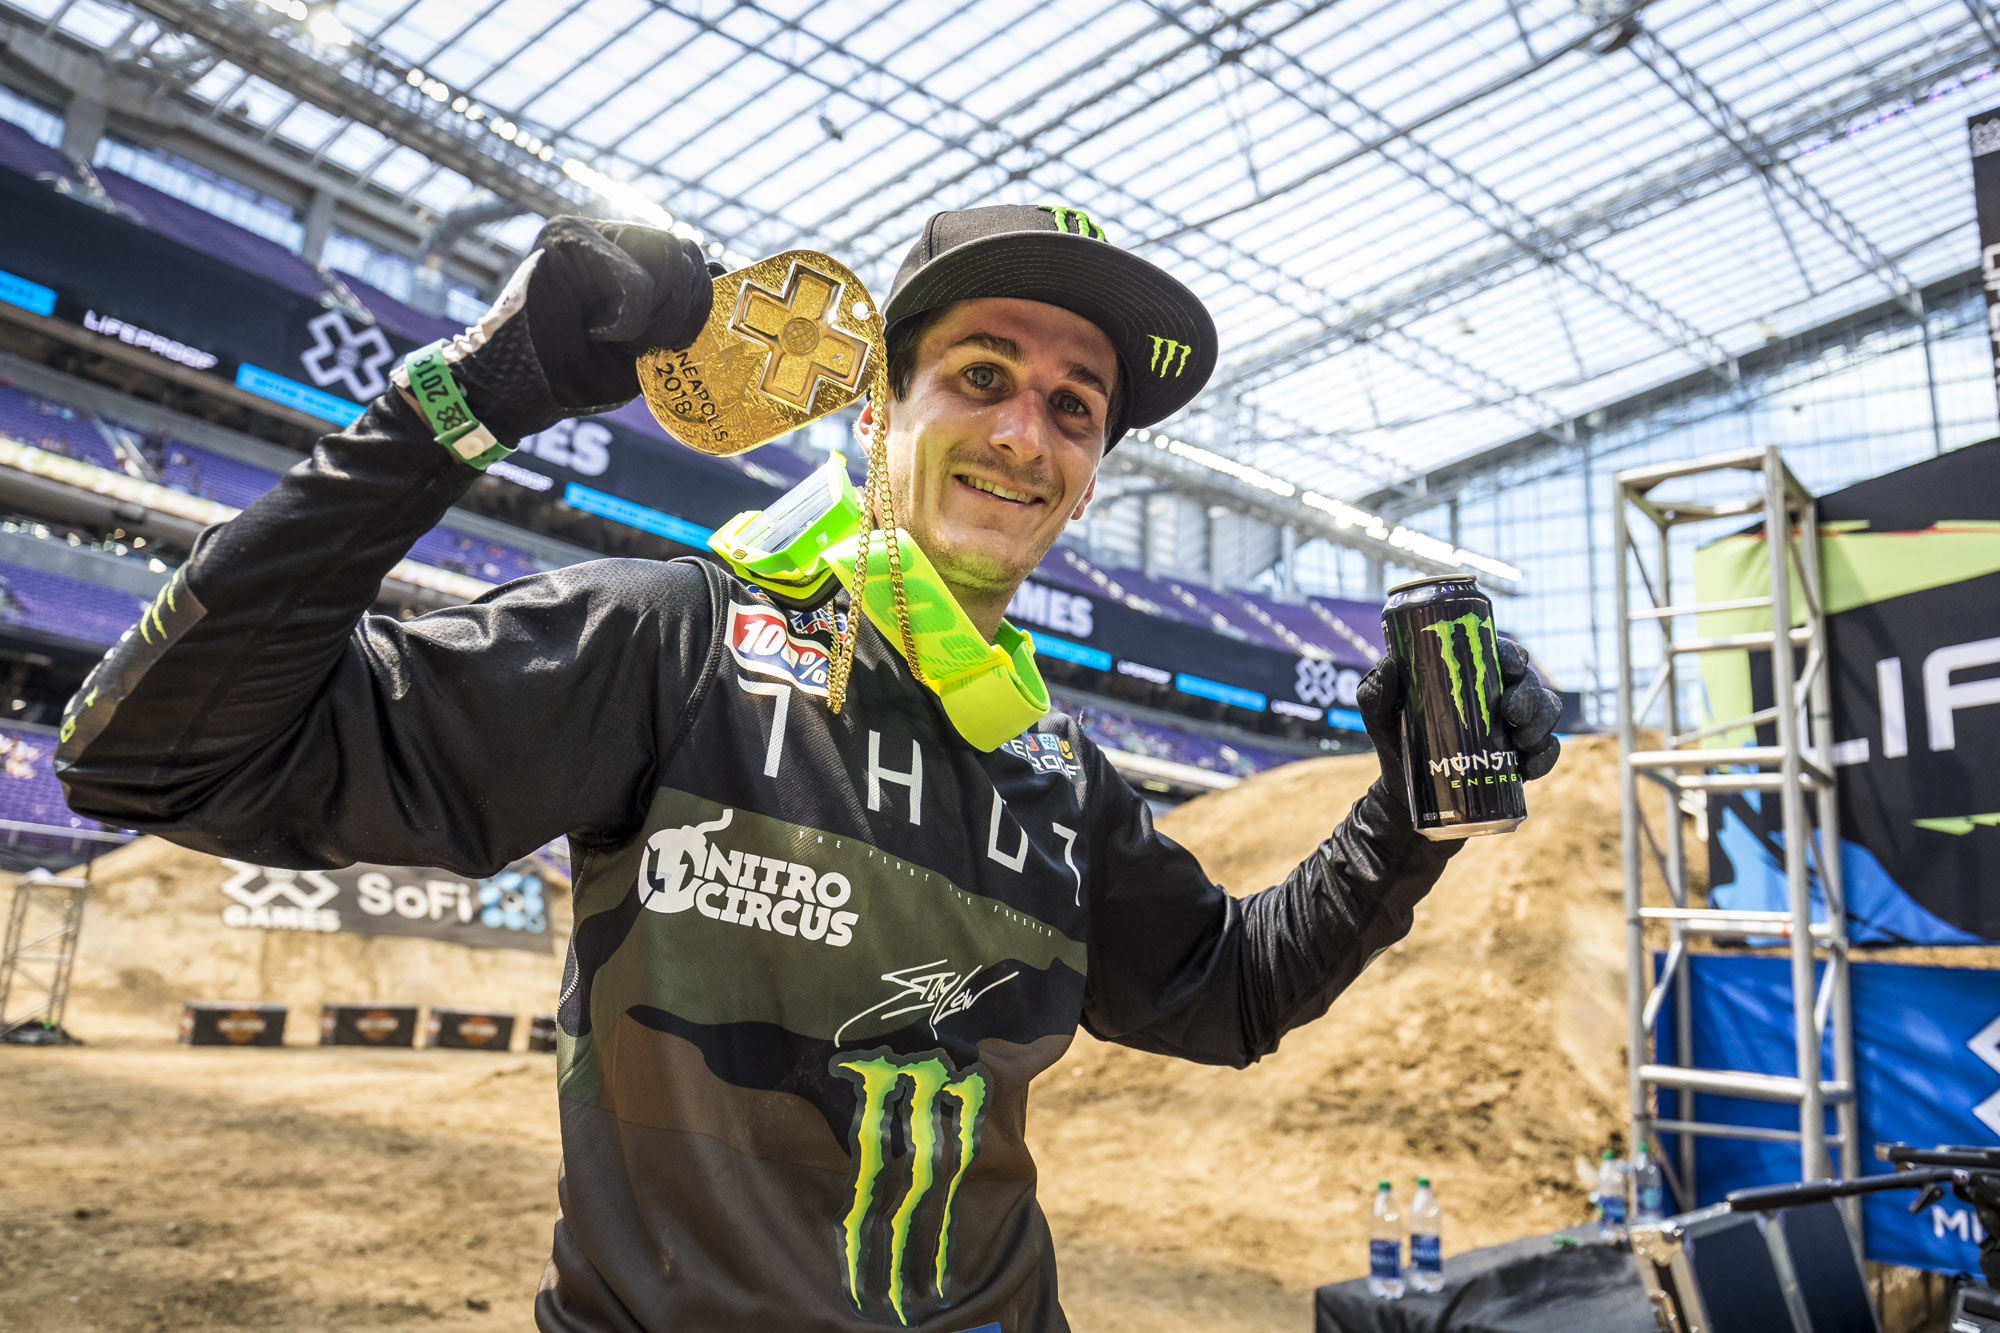 Monster Energy's Jarryd McNeil Takes Gold in Moto X Step Up at X Games Minneapolis 2018